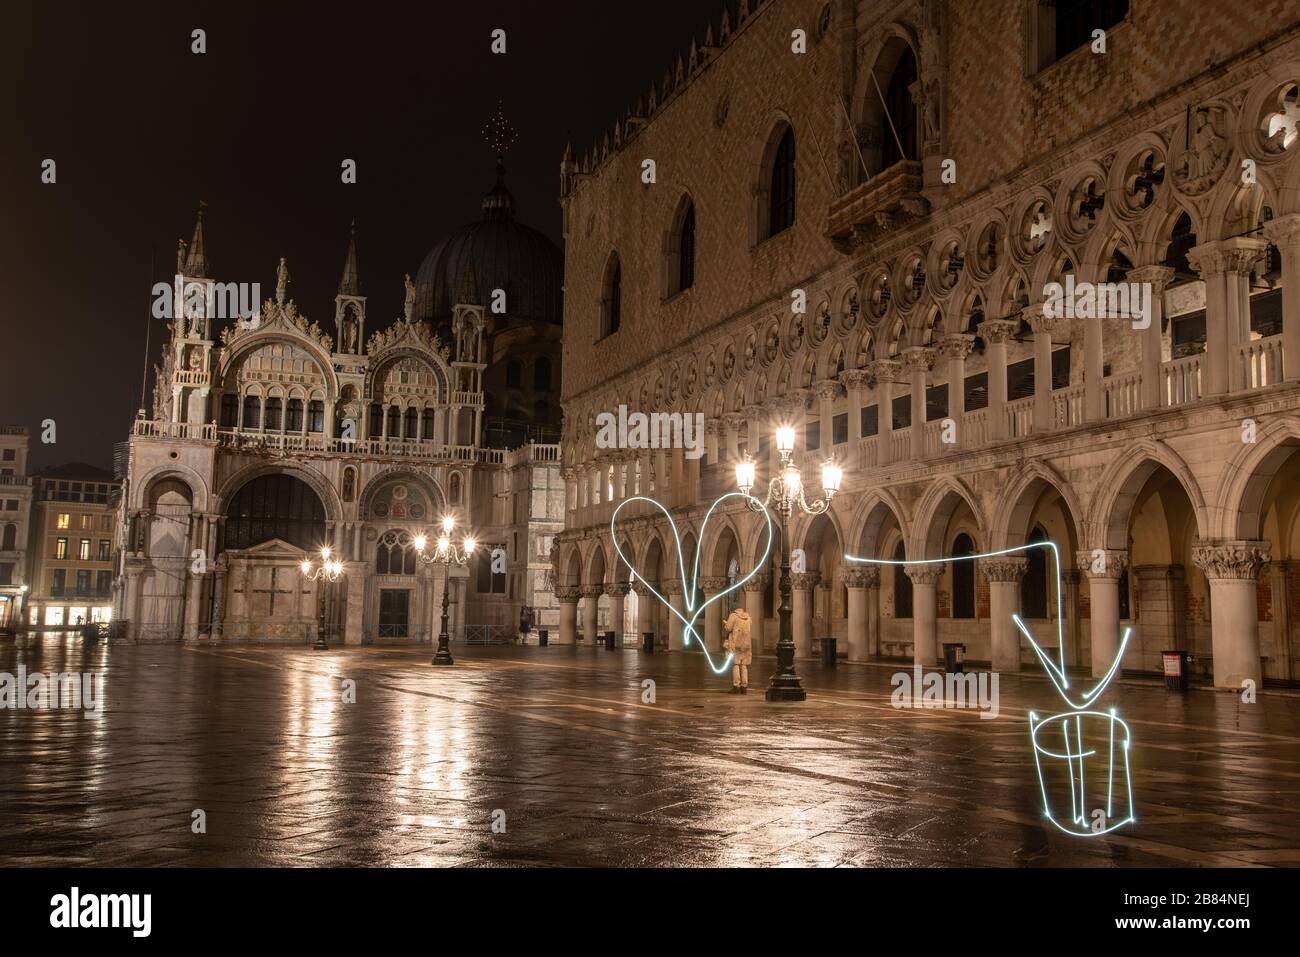 Writing with Light in front of the Illuminated Doge Palace on the Marks Square at Night, Venice/Italy Stock Photo